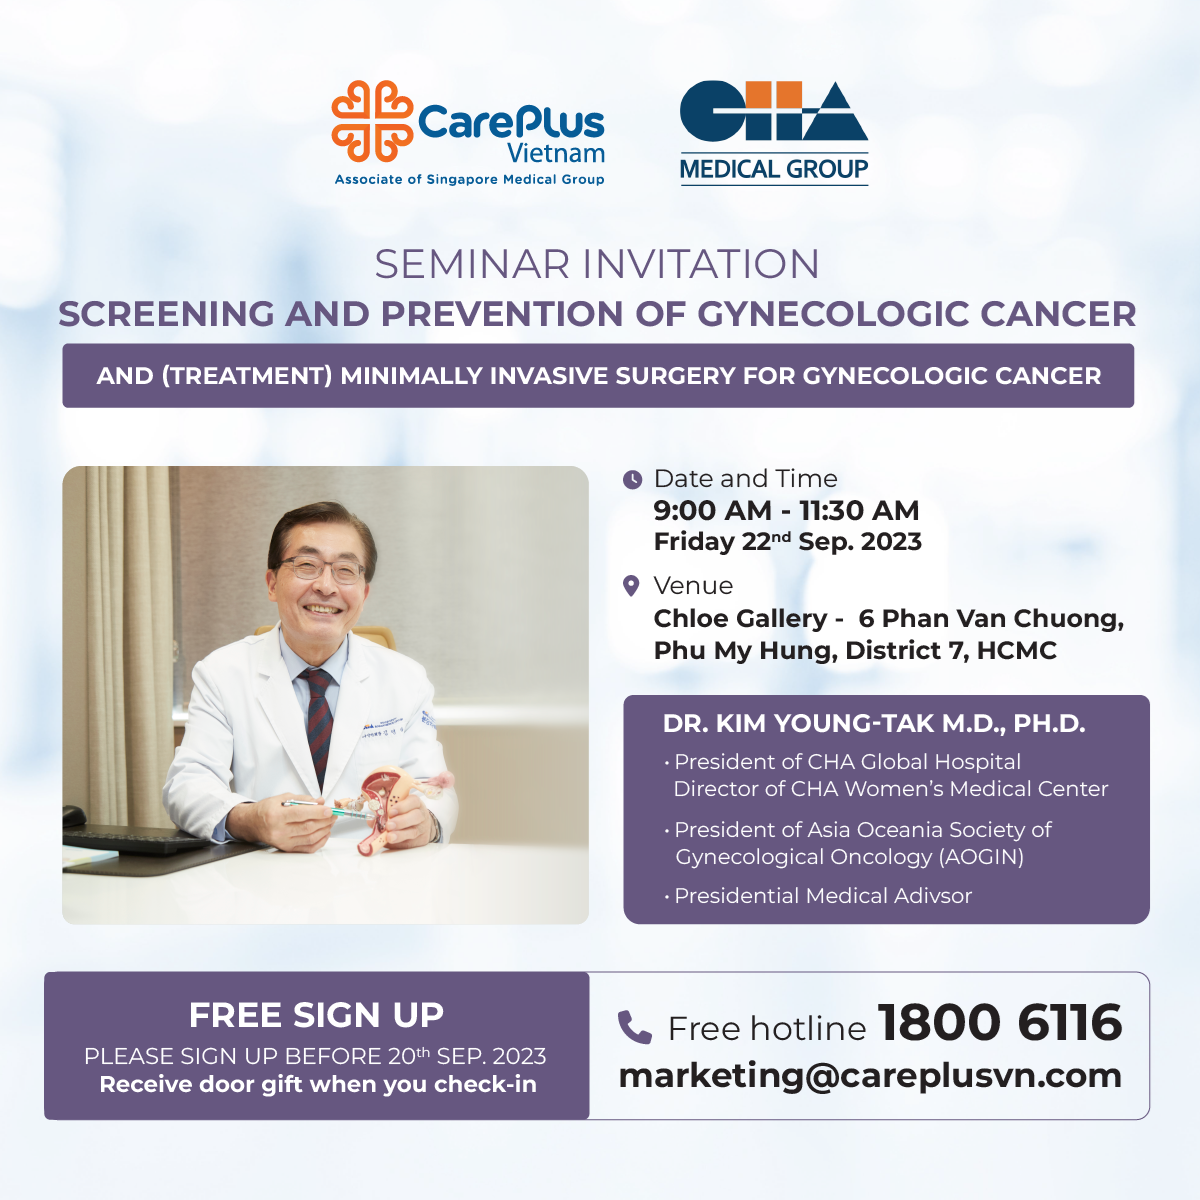 SEMINAR “Screening and Prevention of Gynecologic Cancer & Minimally Invasive Surgery for Gynecologic Cancers” 